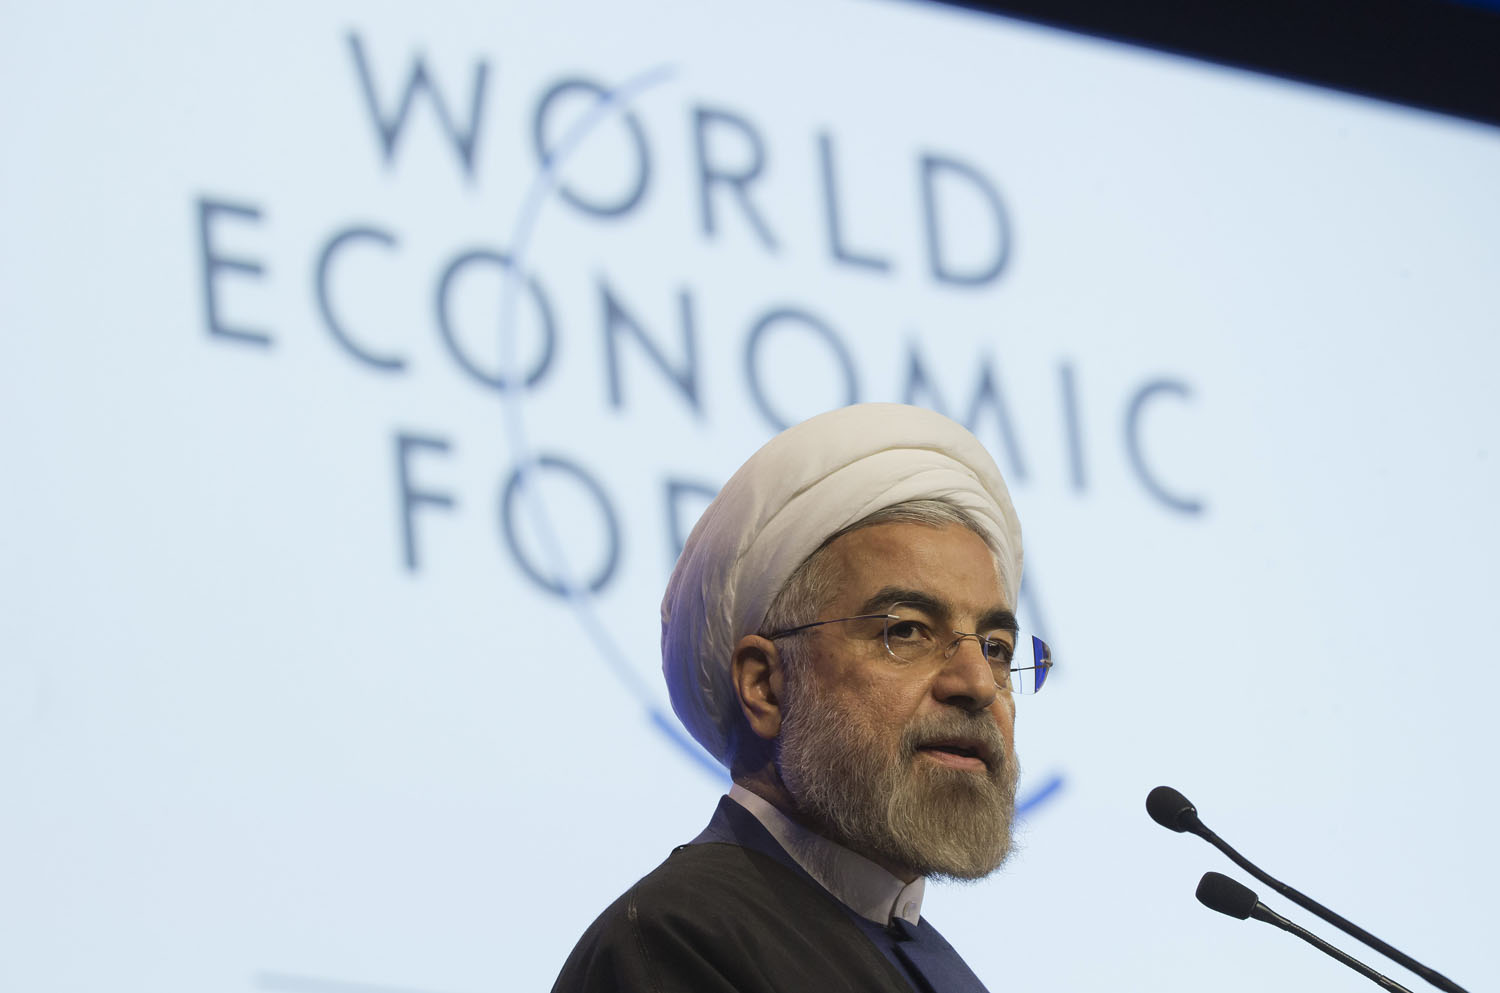 Iranian President Hassan Rouhani, speaks during a session of the World Economic Forum in Davos, Switzerland, Jan. 23, 2014. Iran's economy is showing signs of recovery after a breakthrough in the negotiations over the country's nuclear program has allowed an easing of some economic sanctions.  